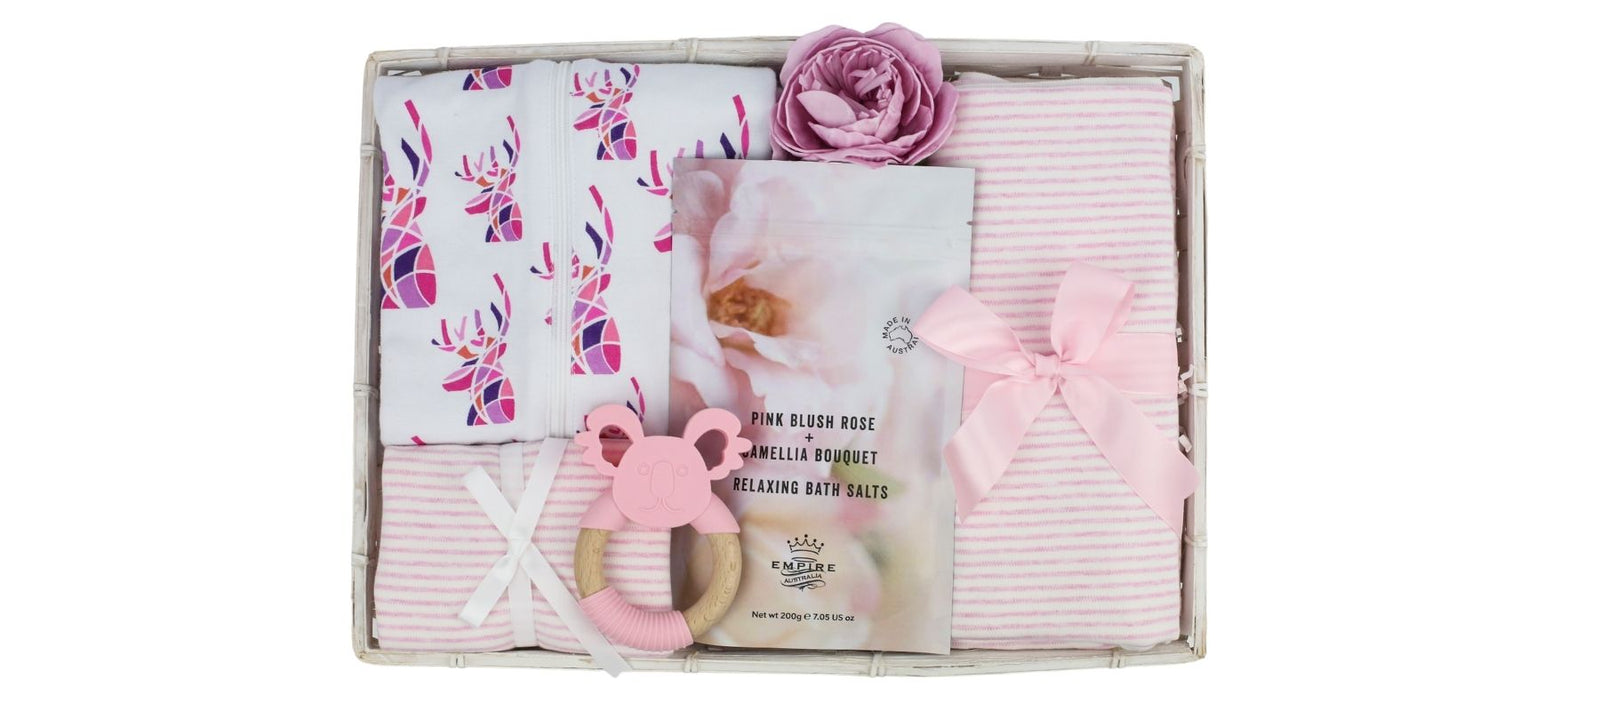 Complete Guide on Baby Hampers. Bespoke Baby Gifts